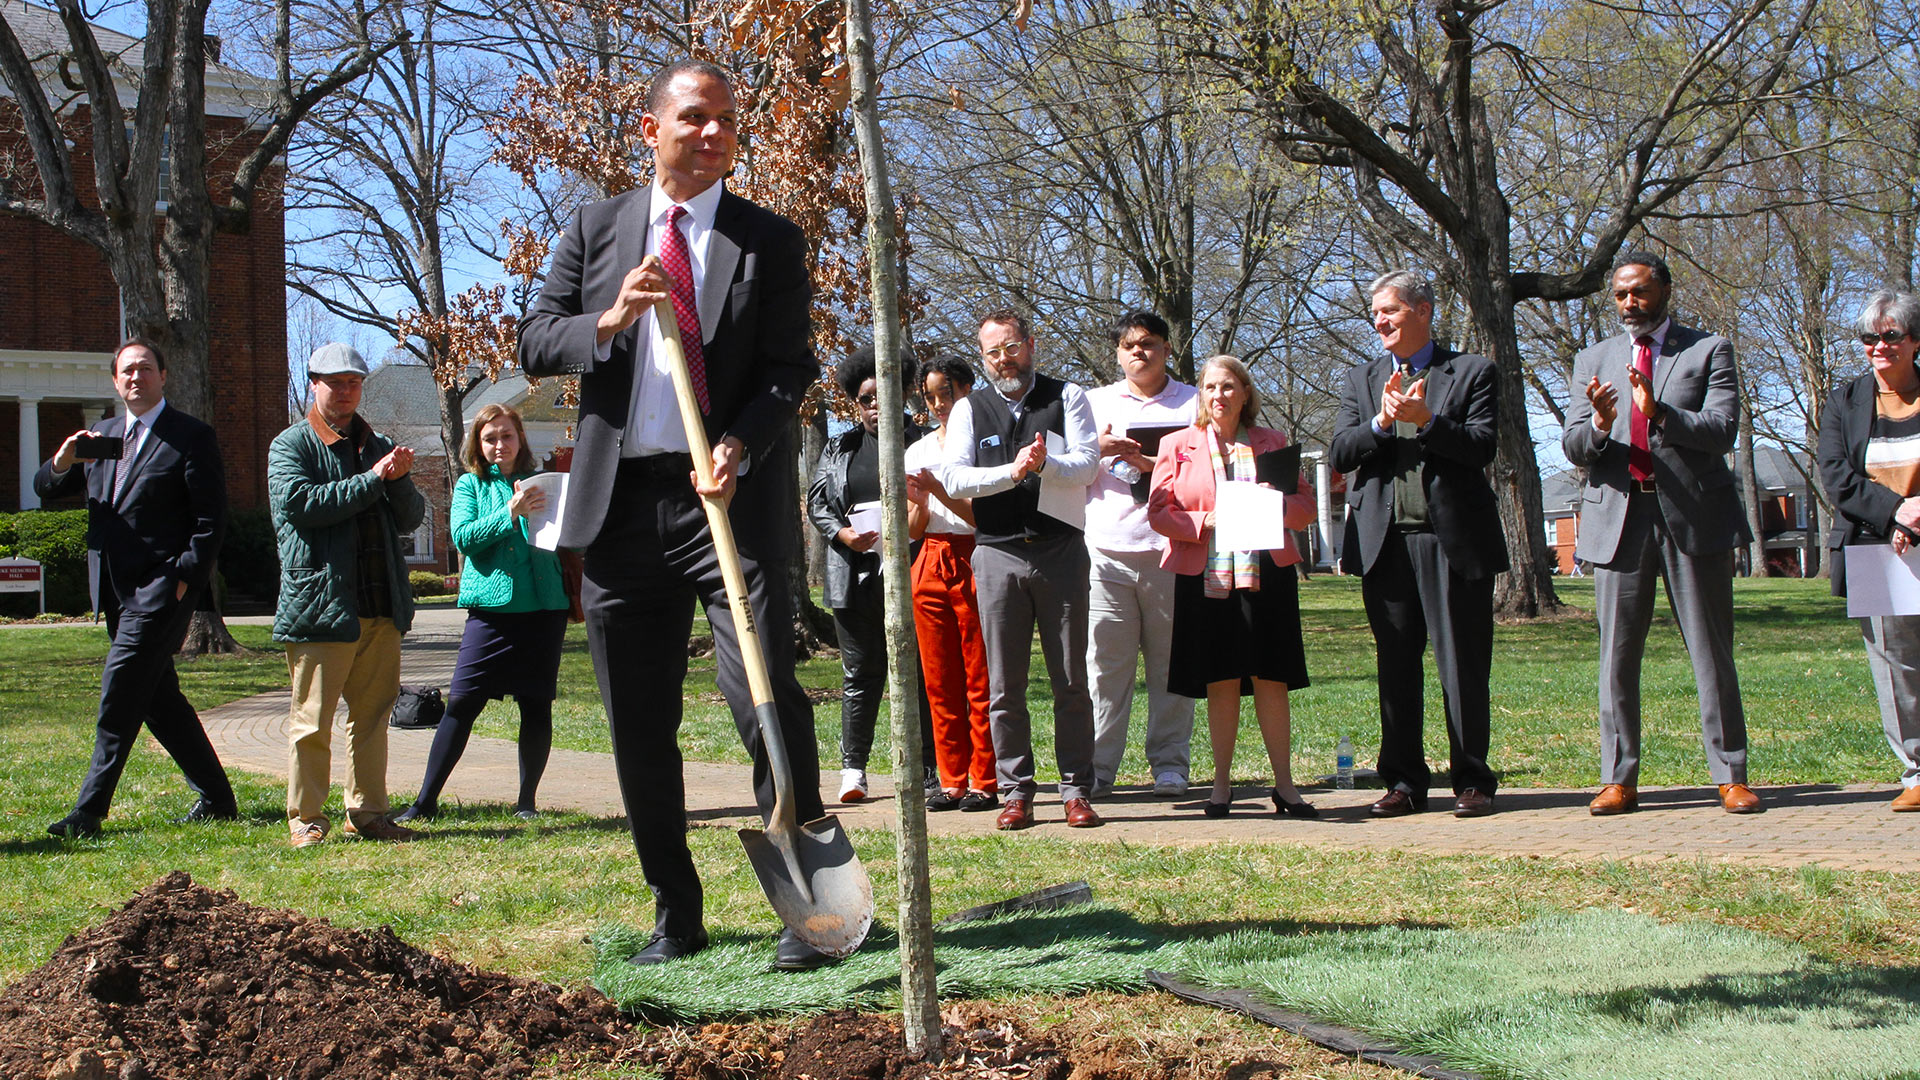 A memorial tree planting followed the ceremony.